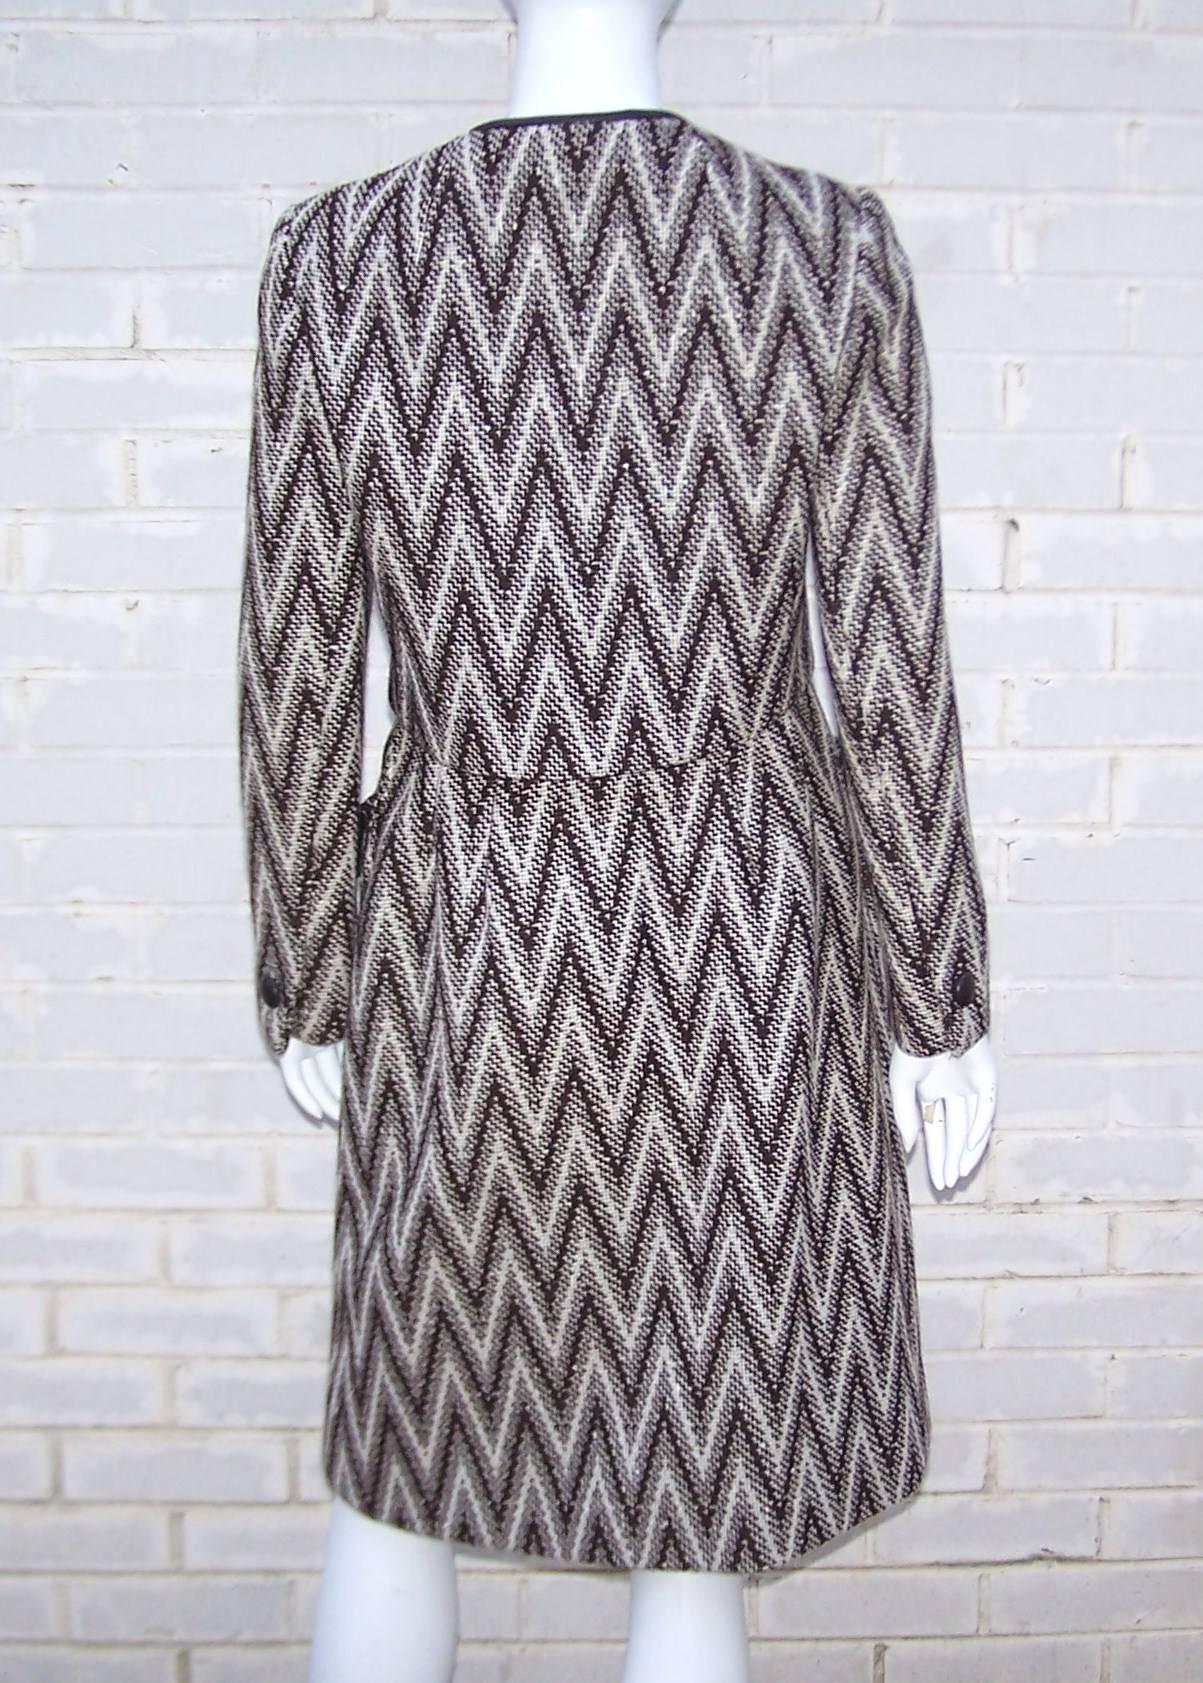 Women's 1970's Gloria Sachs Chevron Brown Tweed Suit With Leather Trim & Buttons